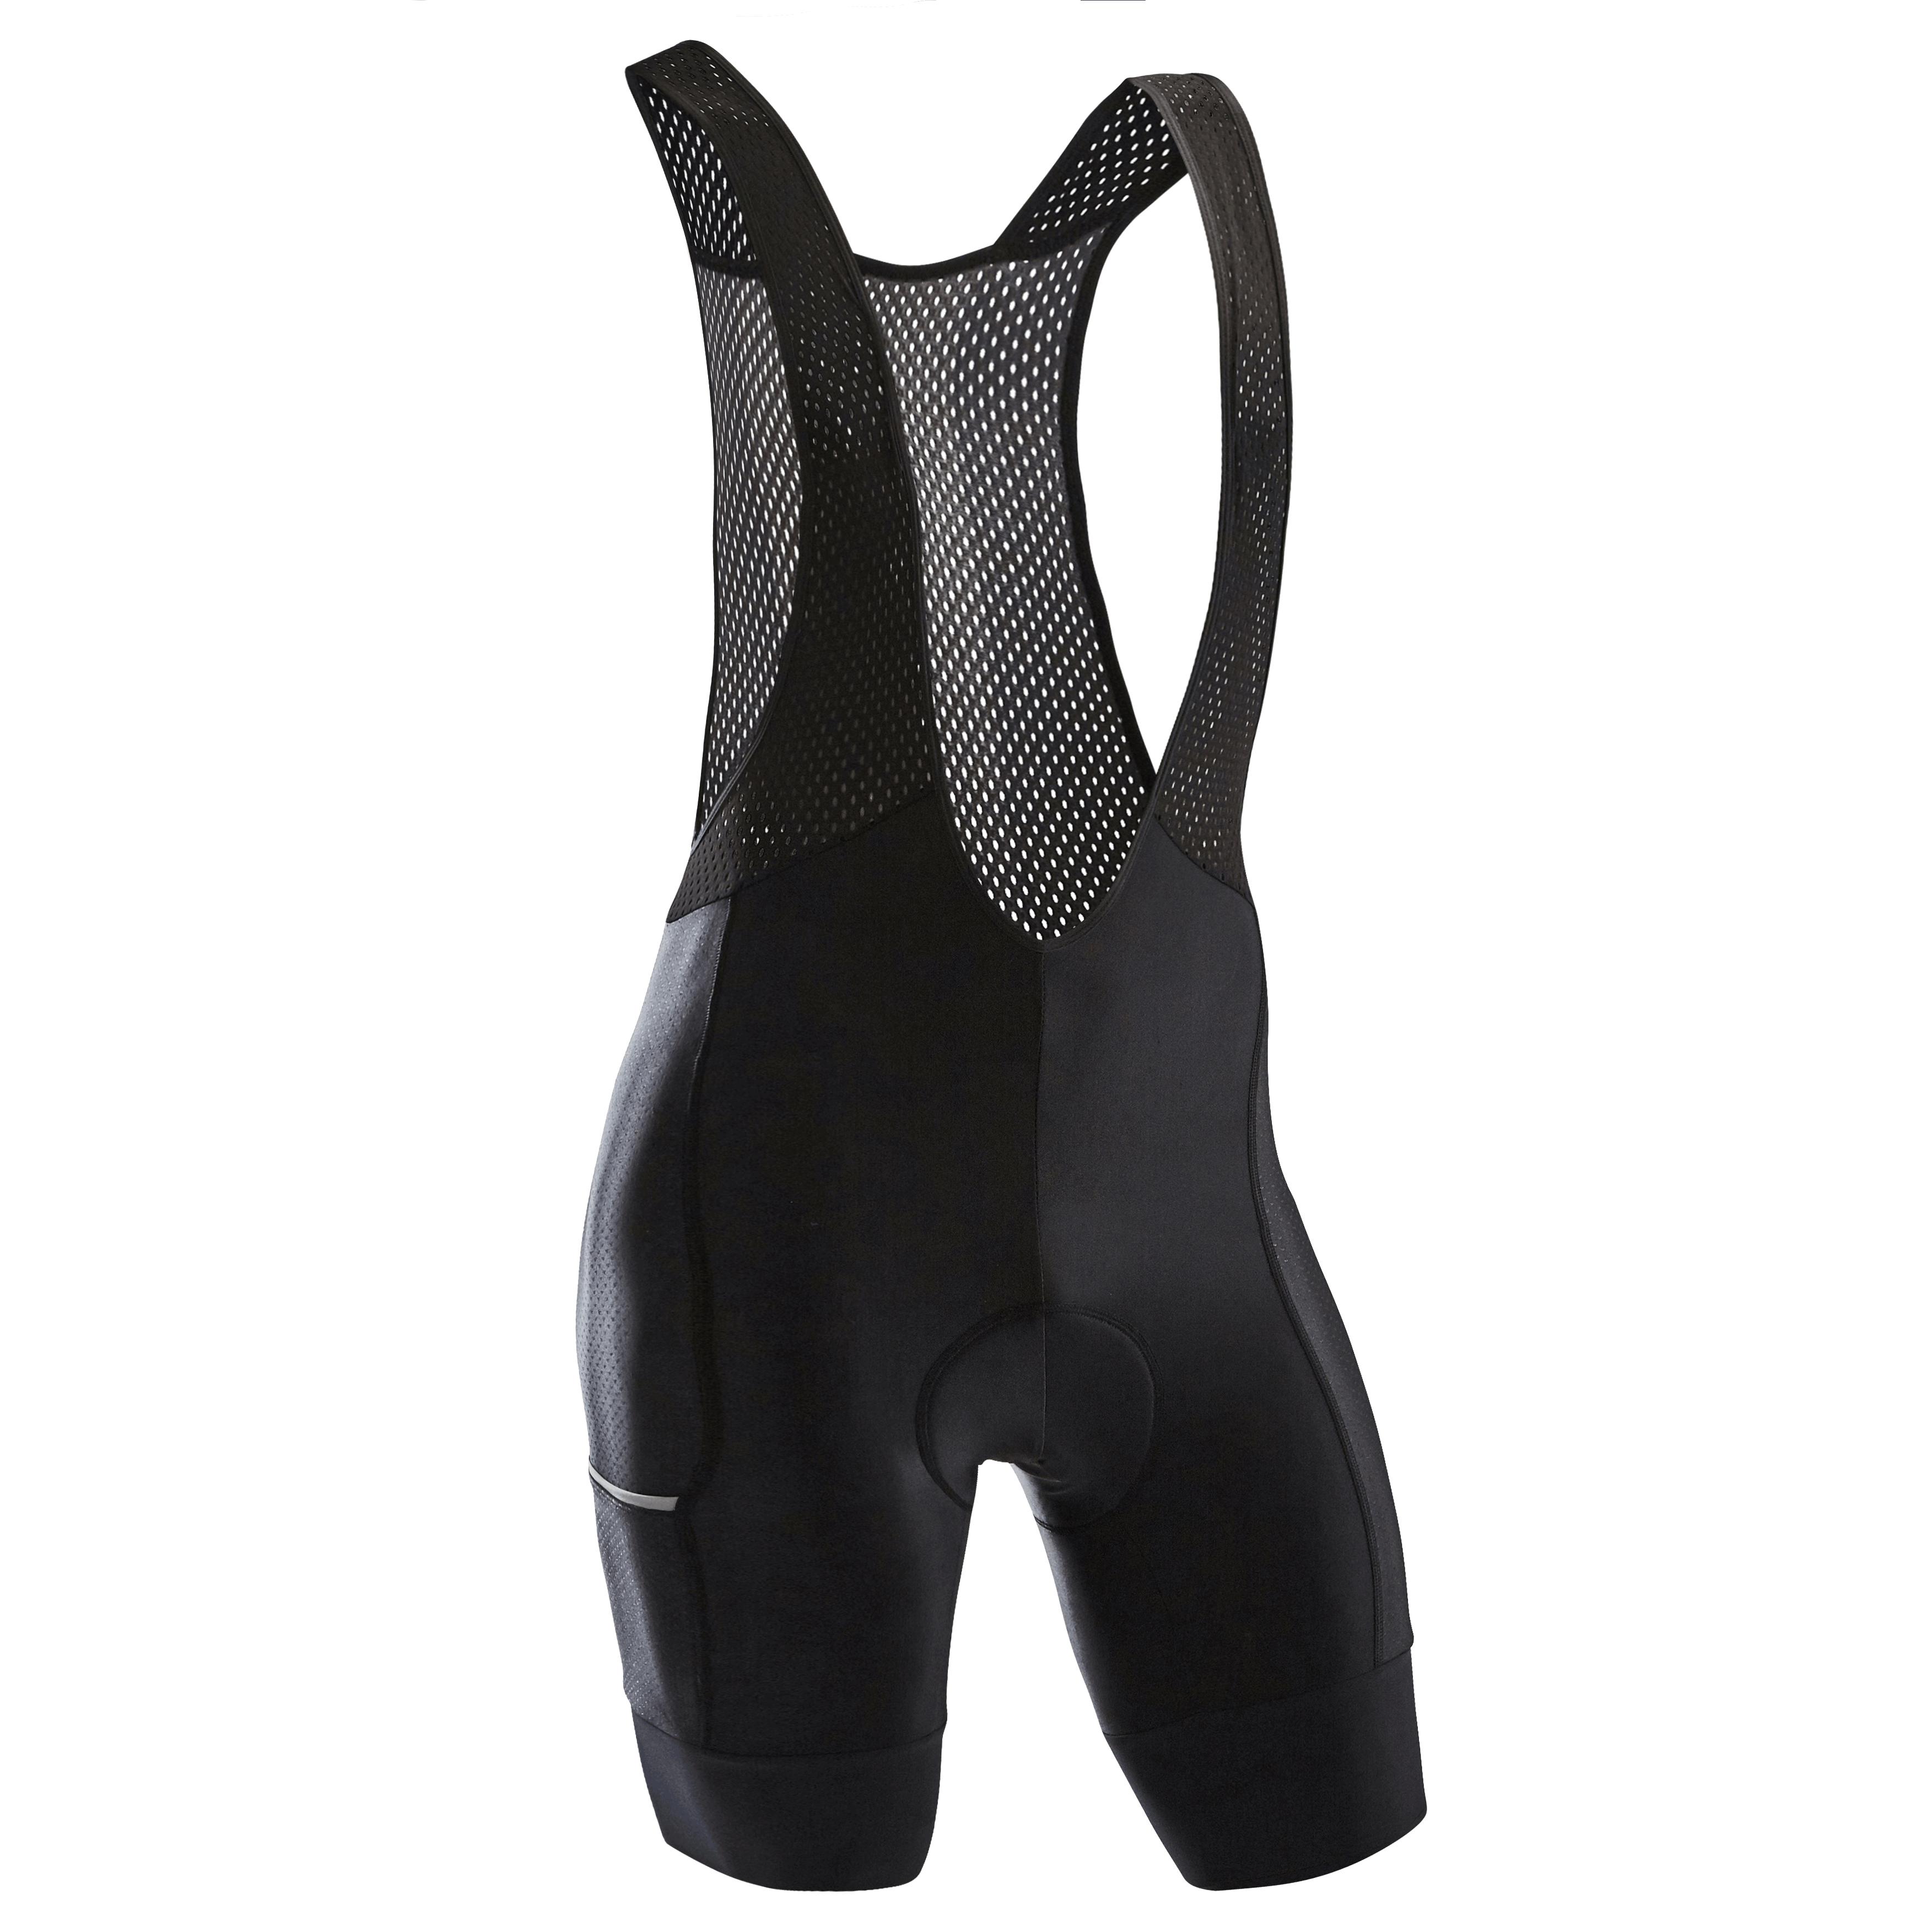 protective cycling clothing